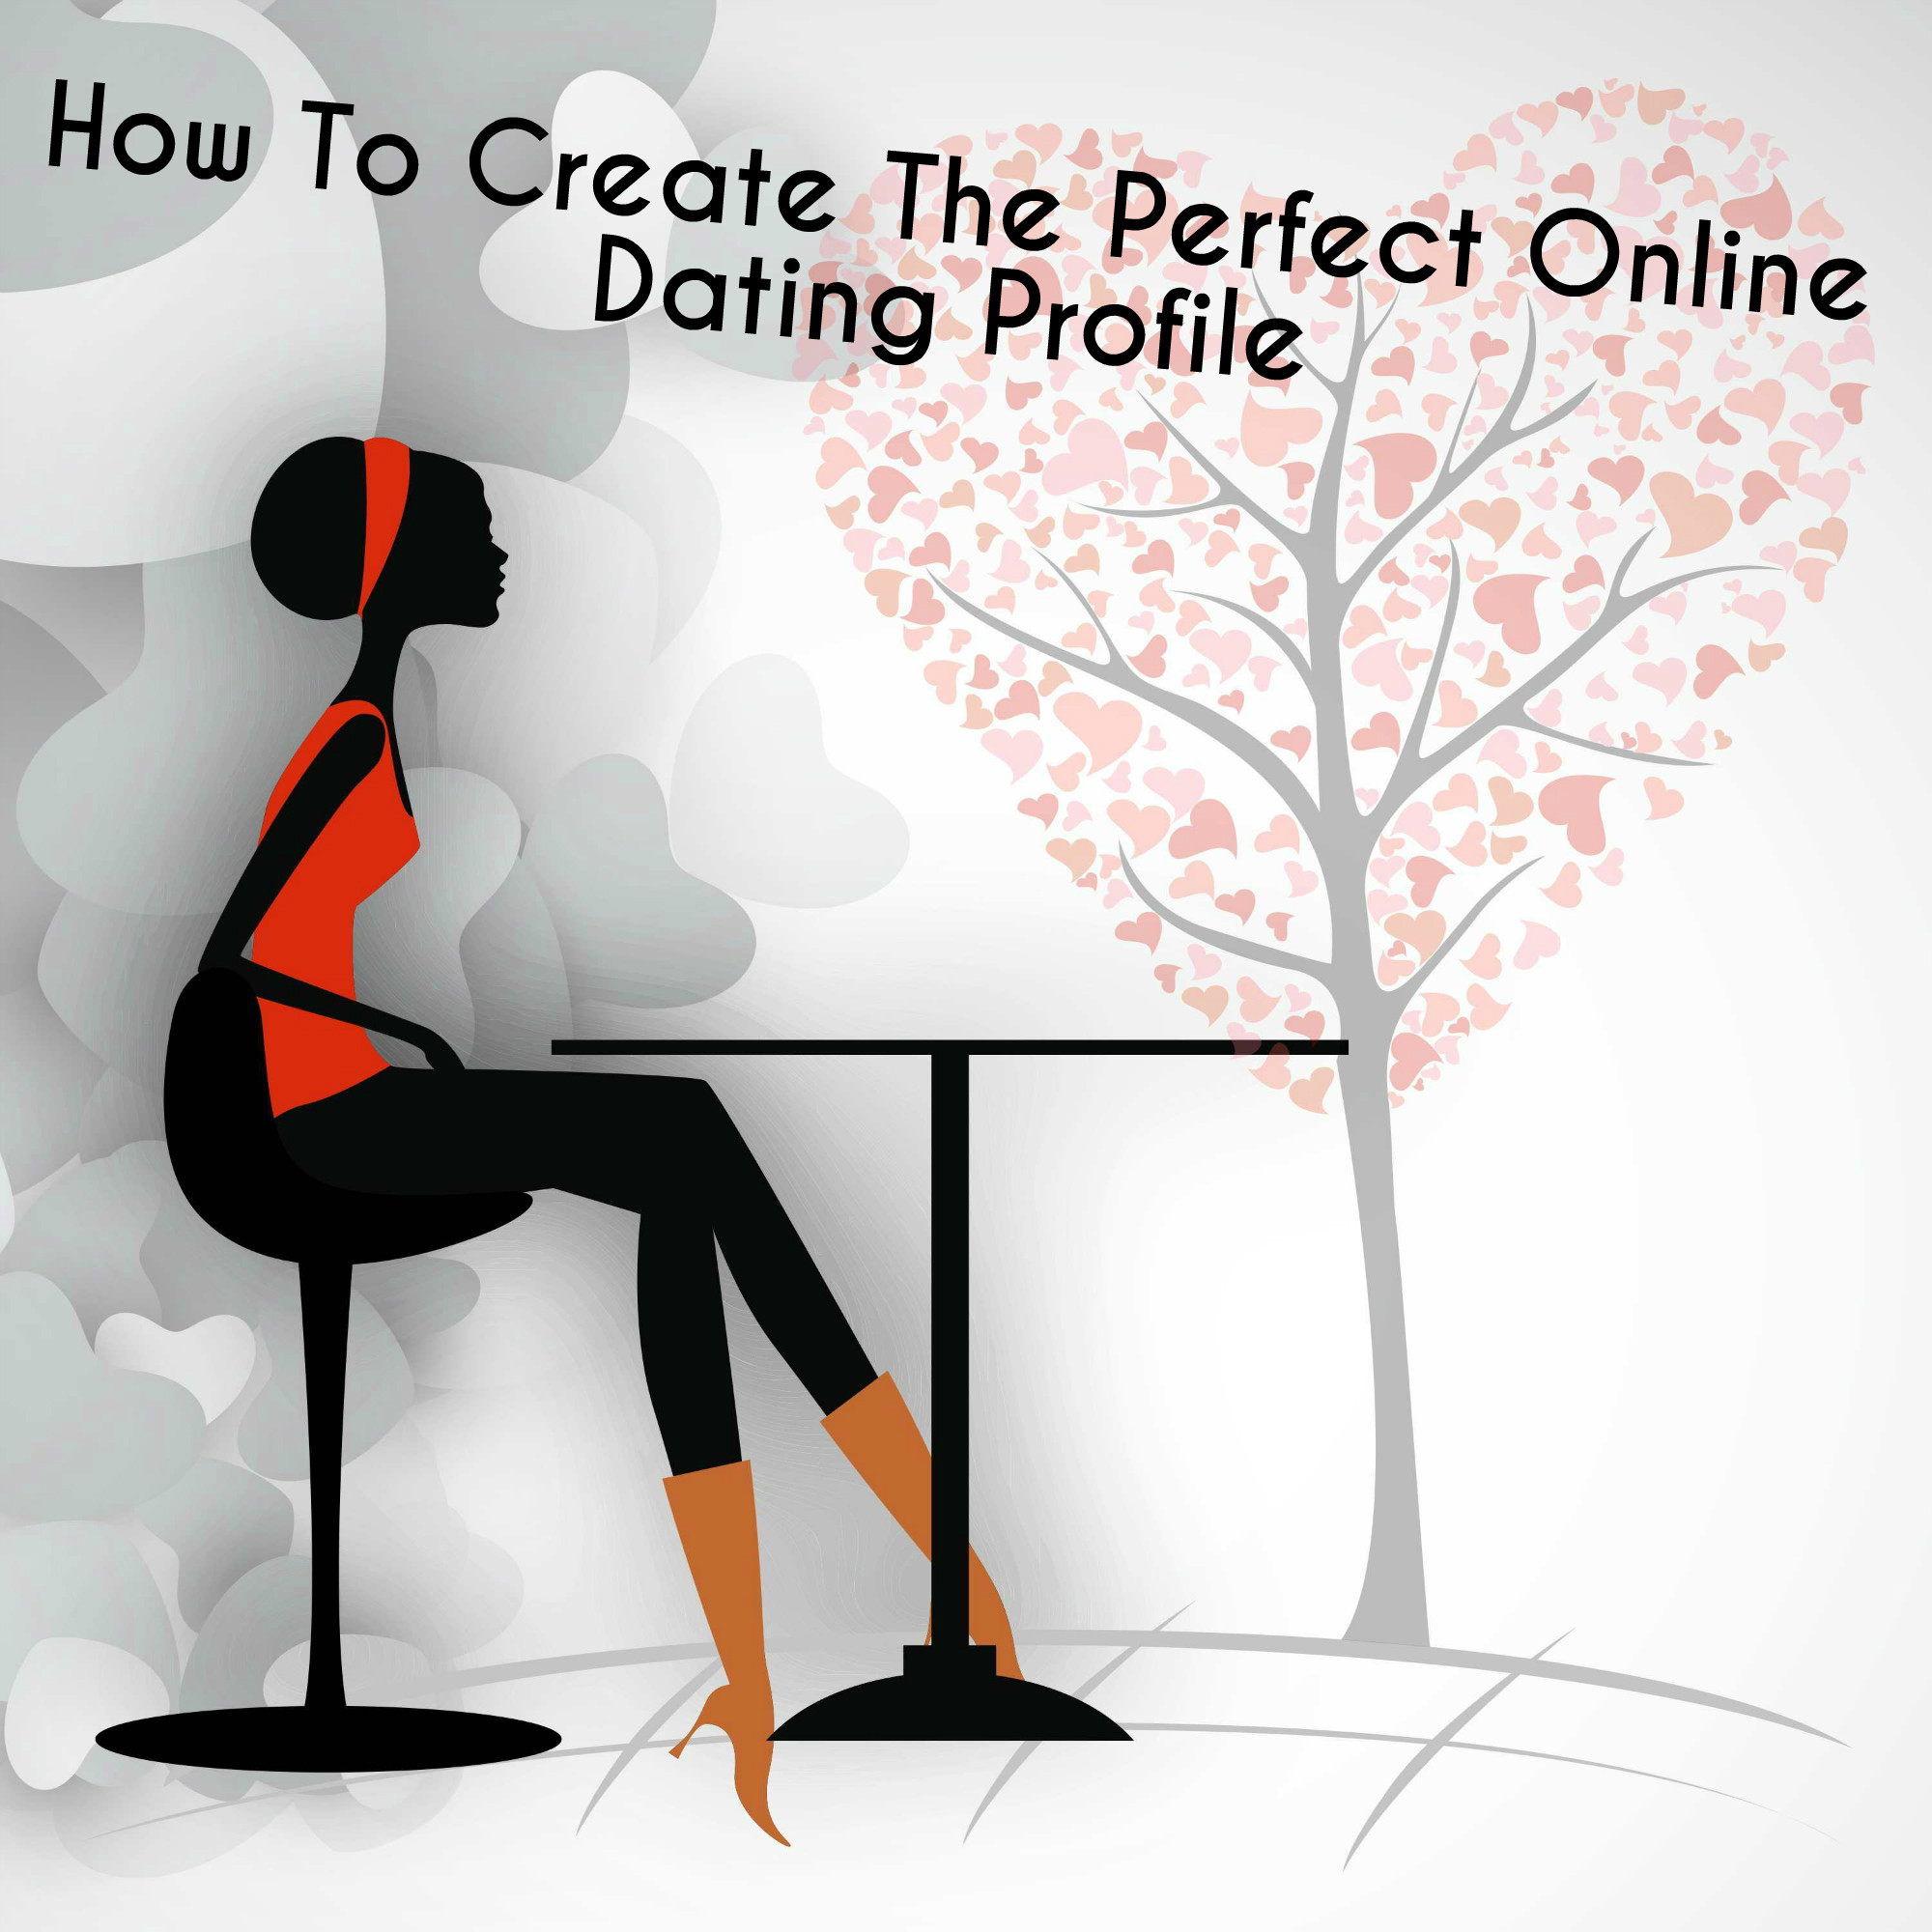 How To Create The Perfect Online Dating Profile